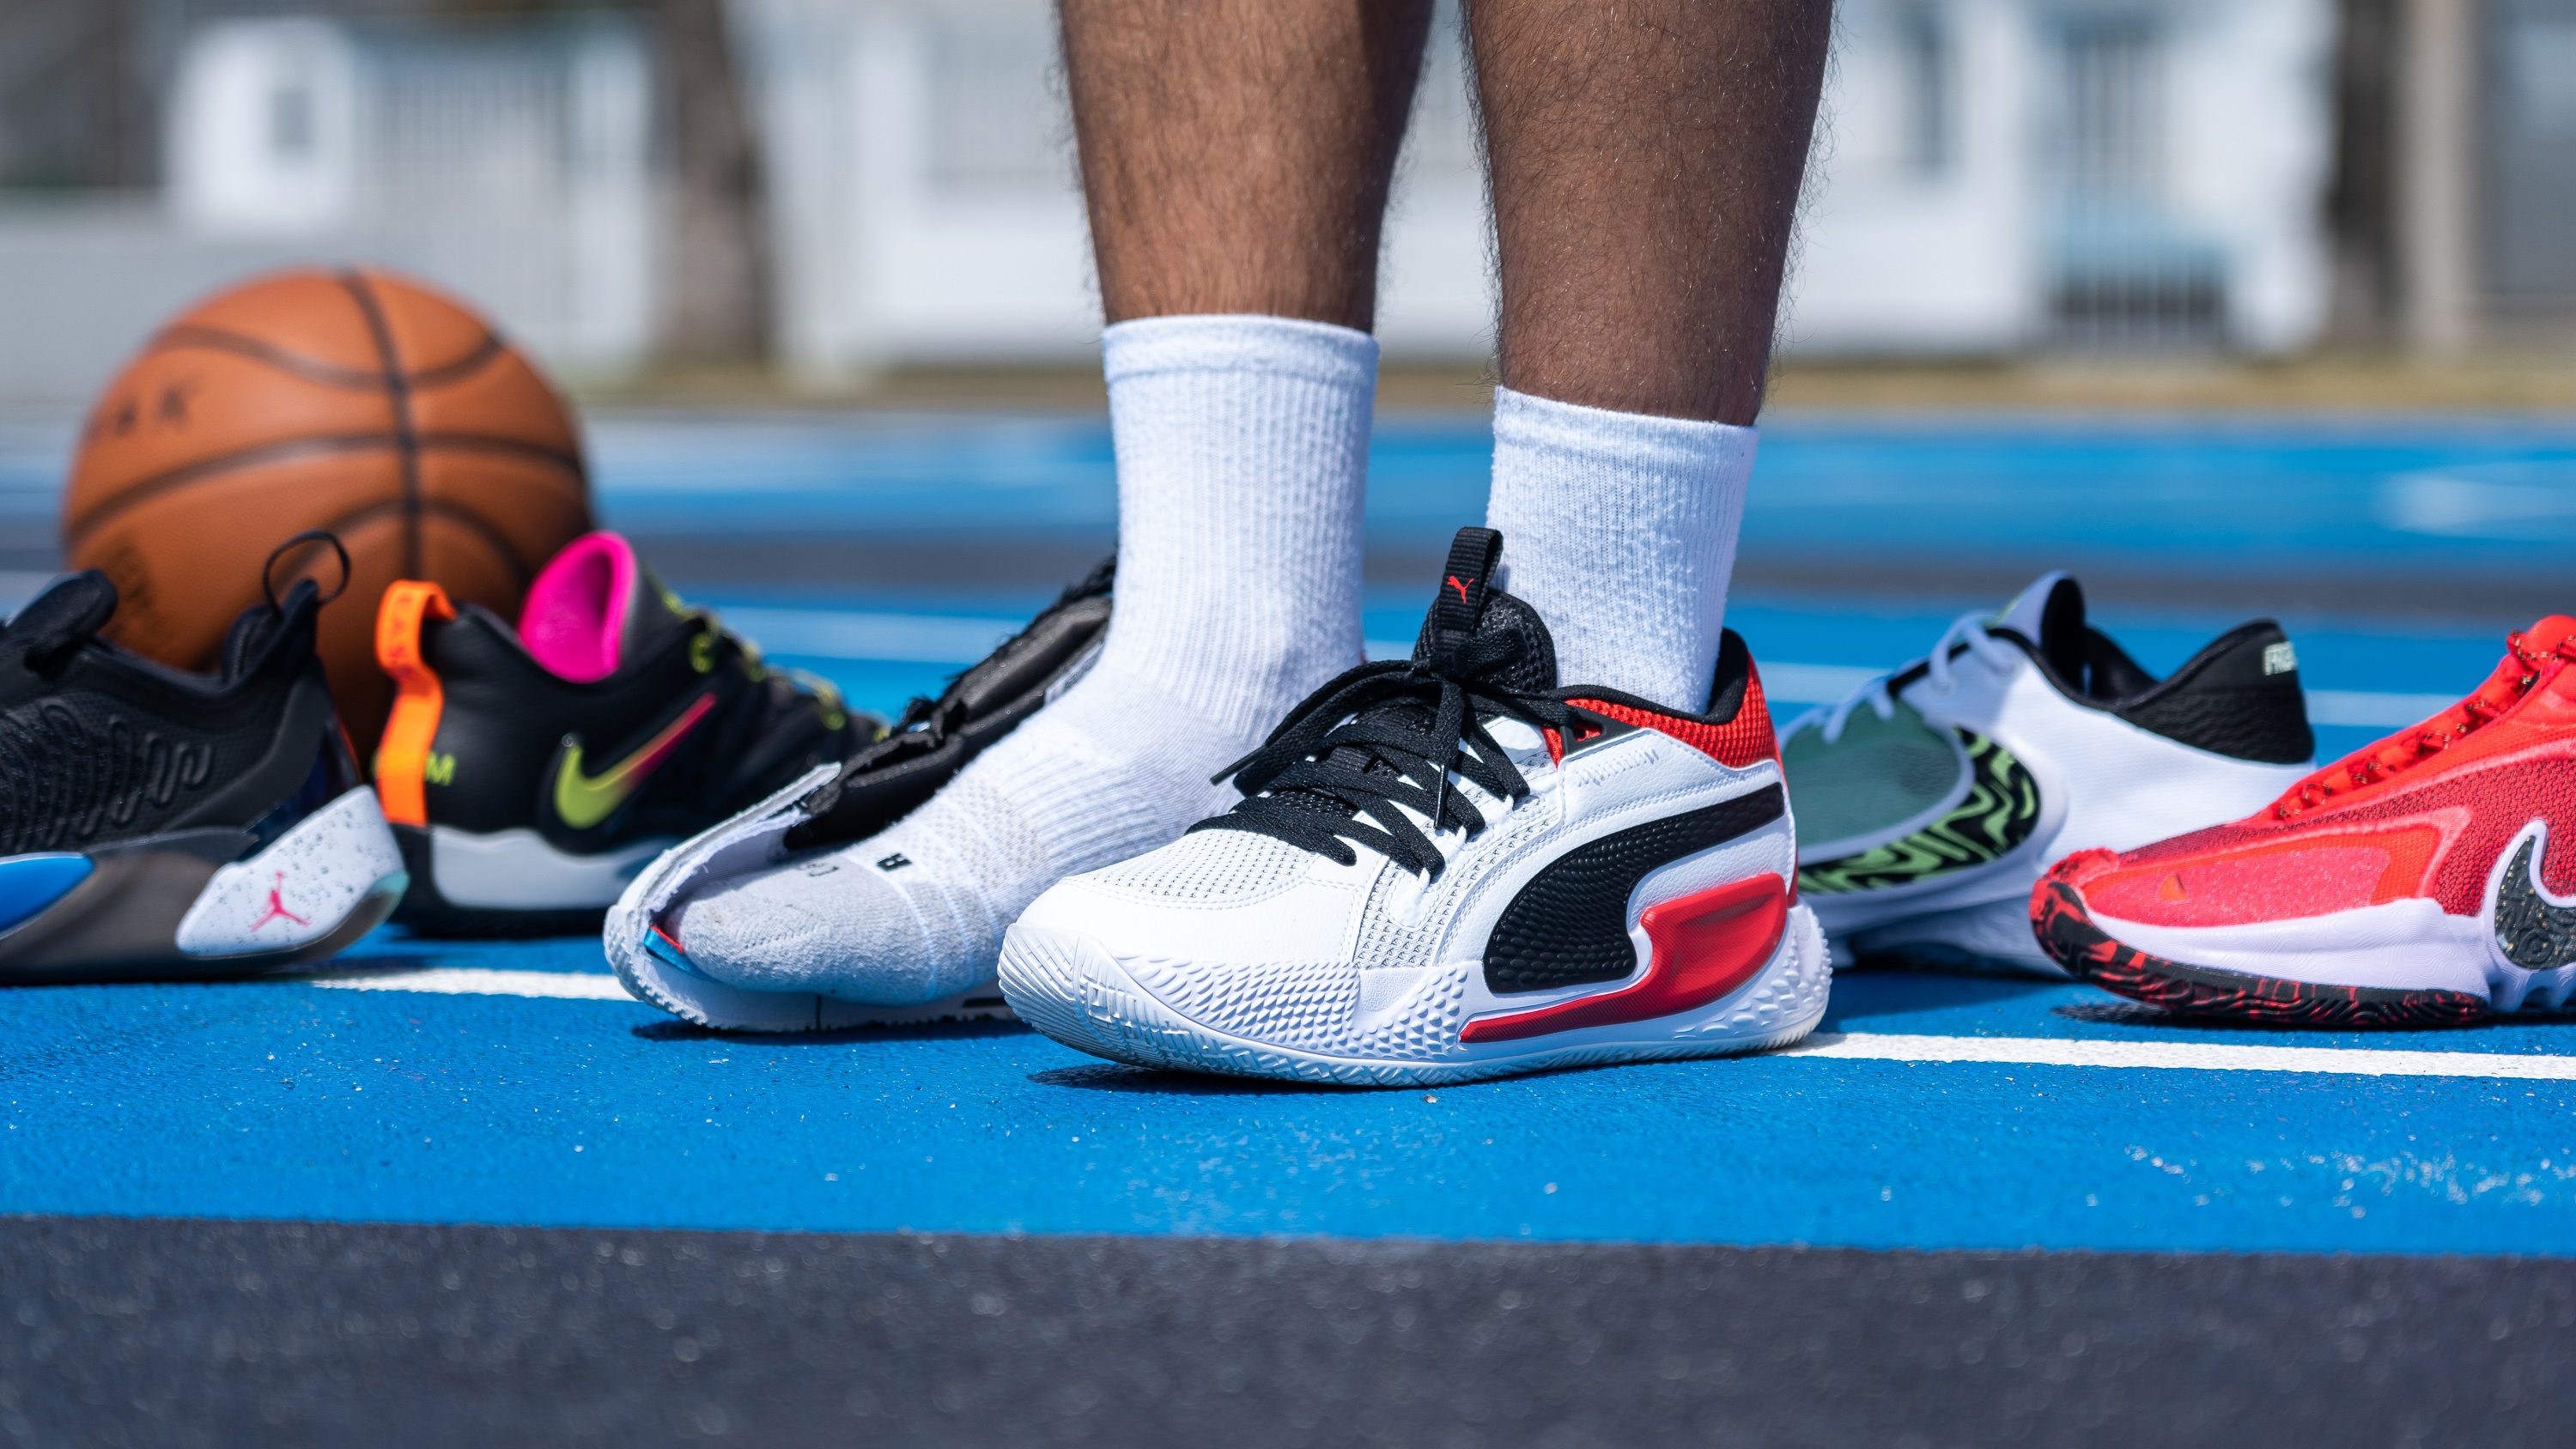 7 Best Low Top Basketball Shoes